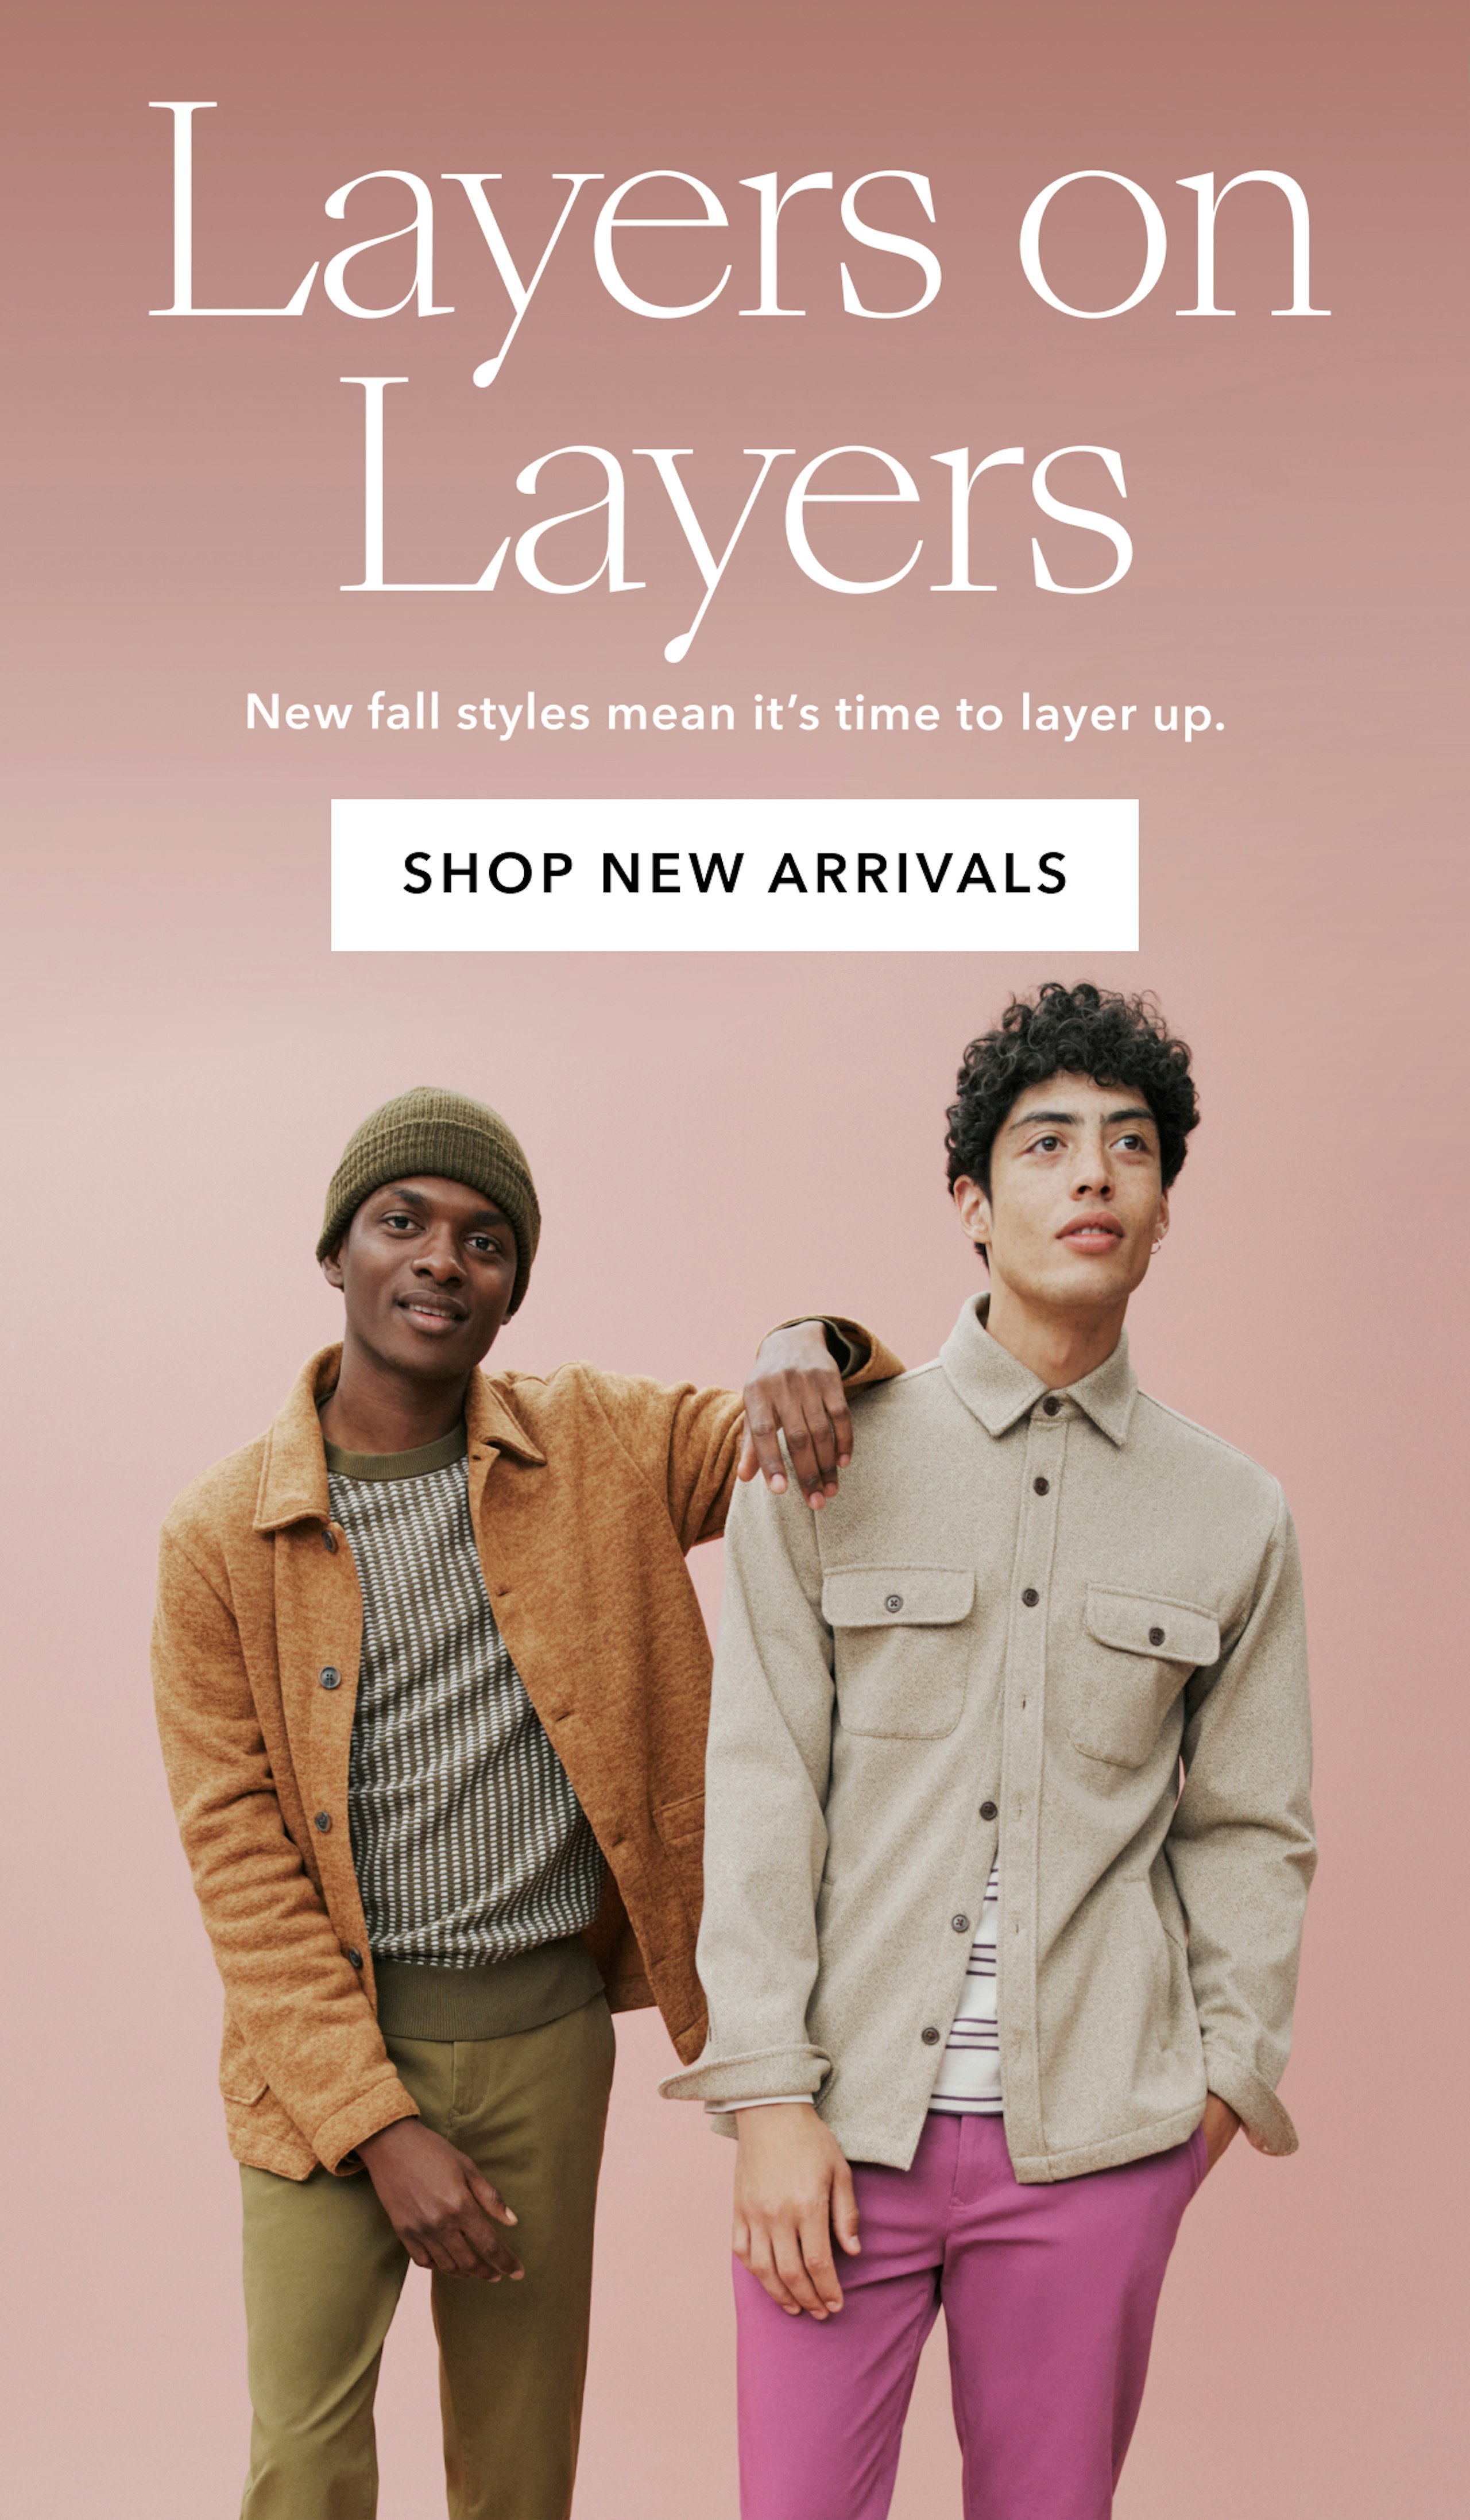 On the left, two men in Bonobos Fall fits. First man has his arm on the shoulder of the second man. Text: Layers on Layers New Fall styles means it's time to layer up. Button: SHOP NEW ARRIVALS.  